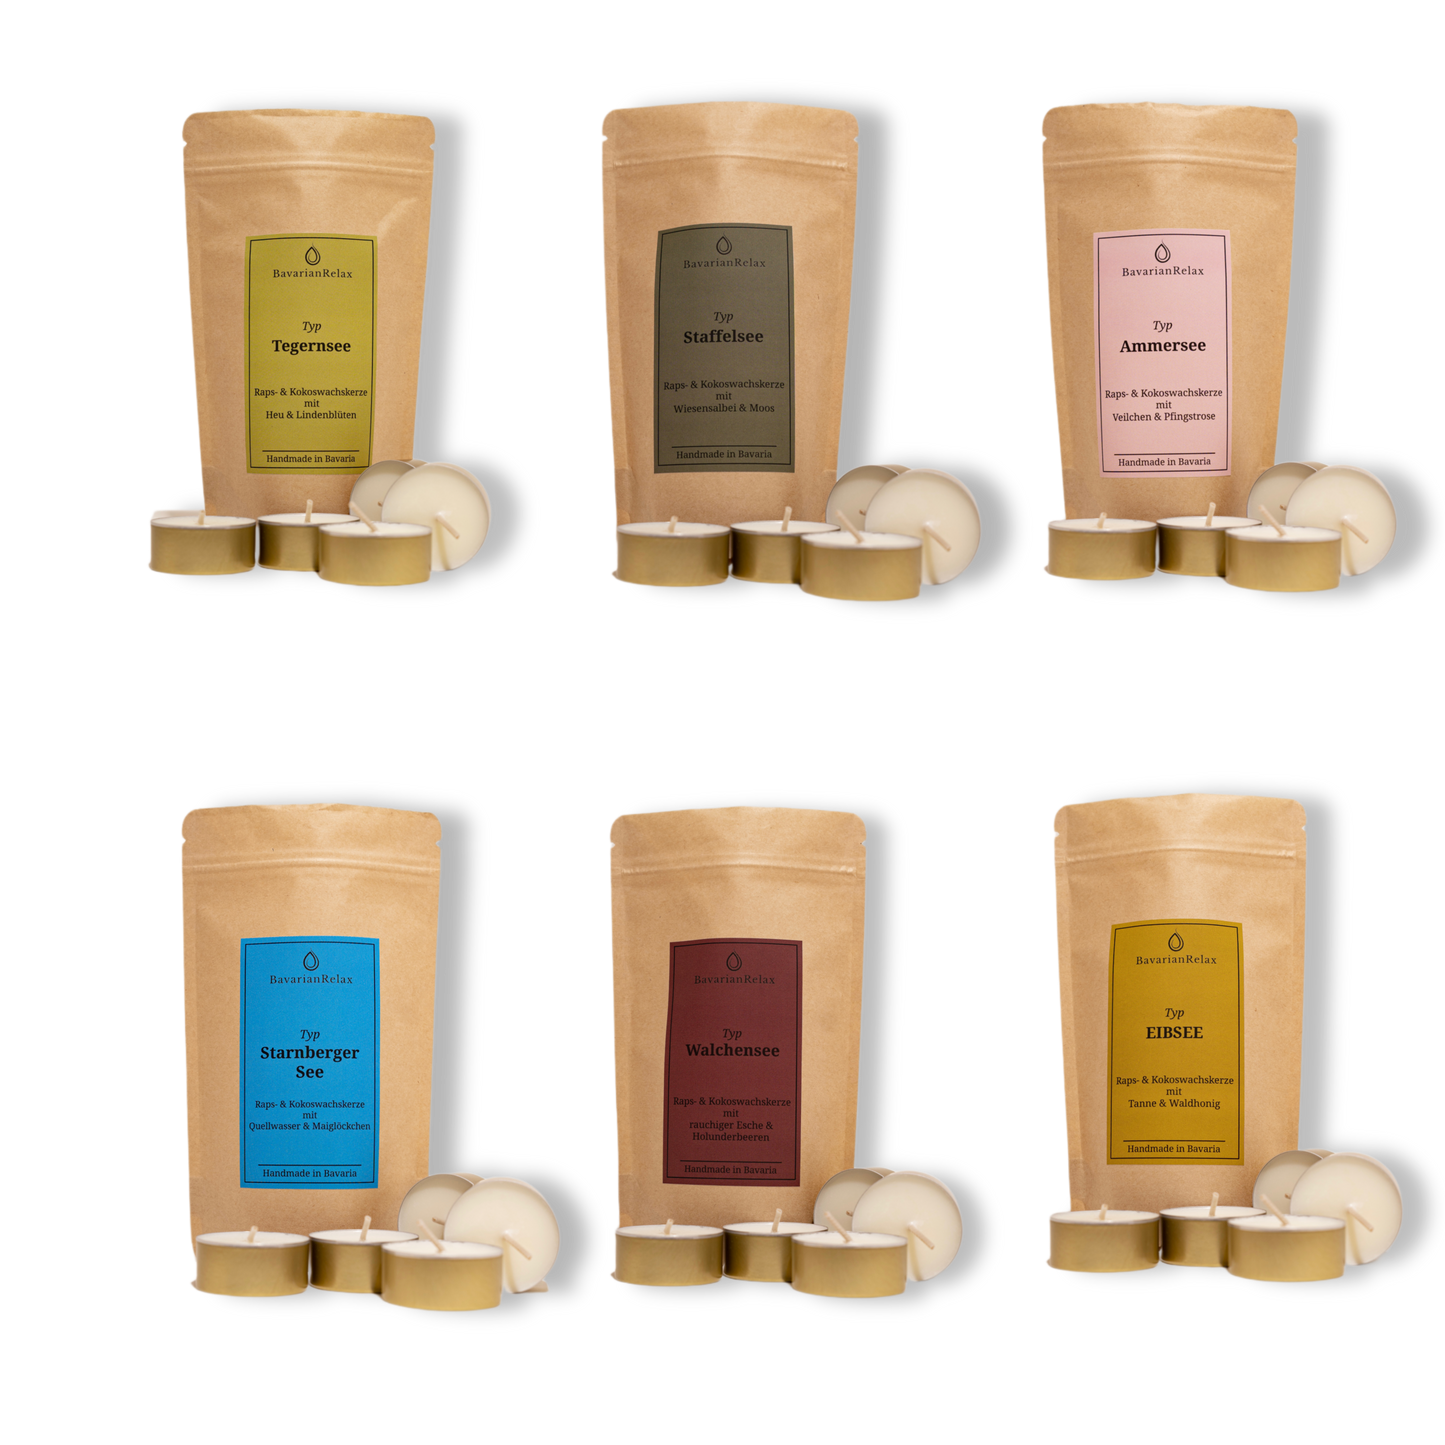 Mini scent collection - 6 pieces of mini scented candles 6x75g